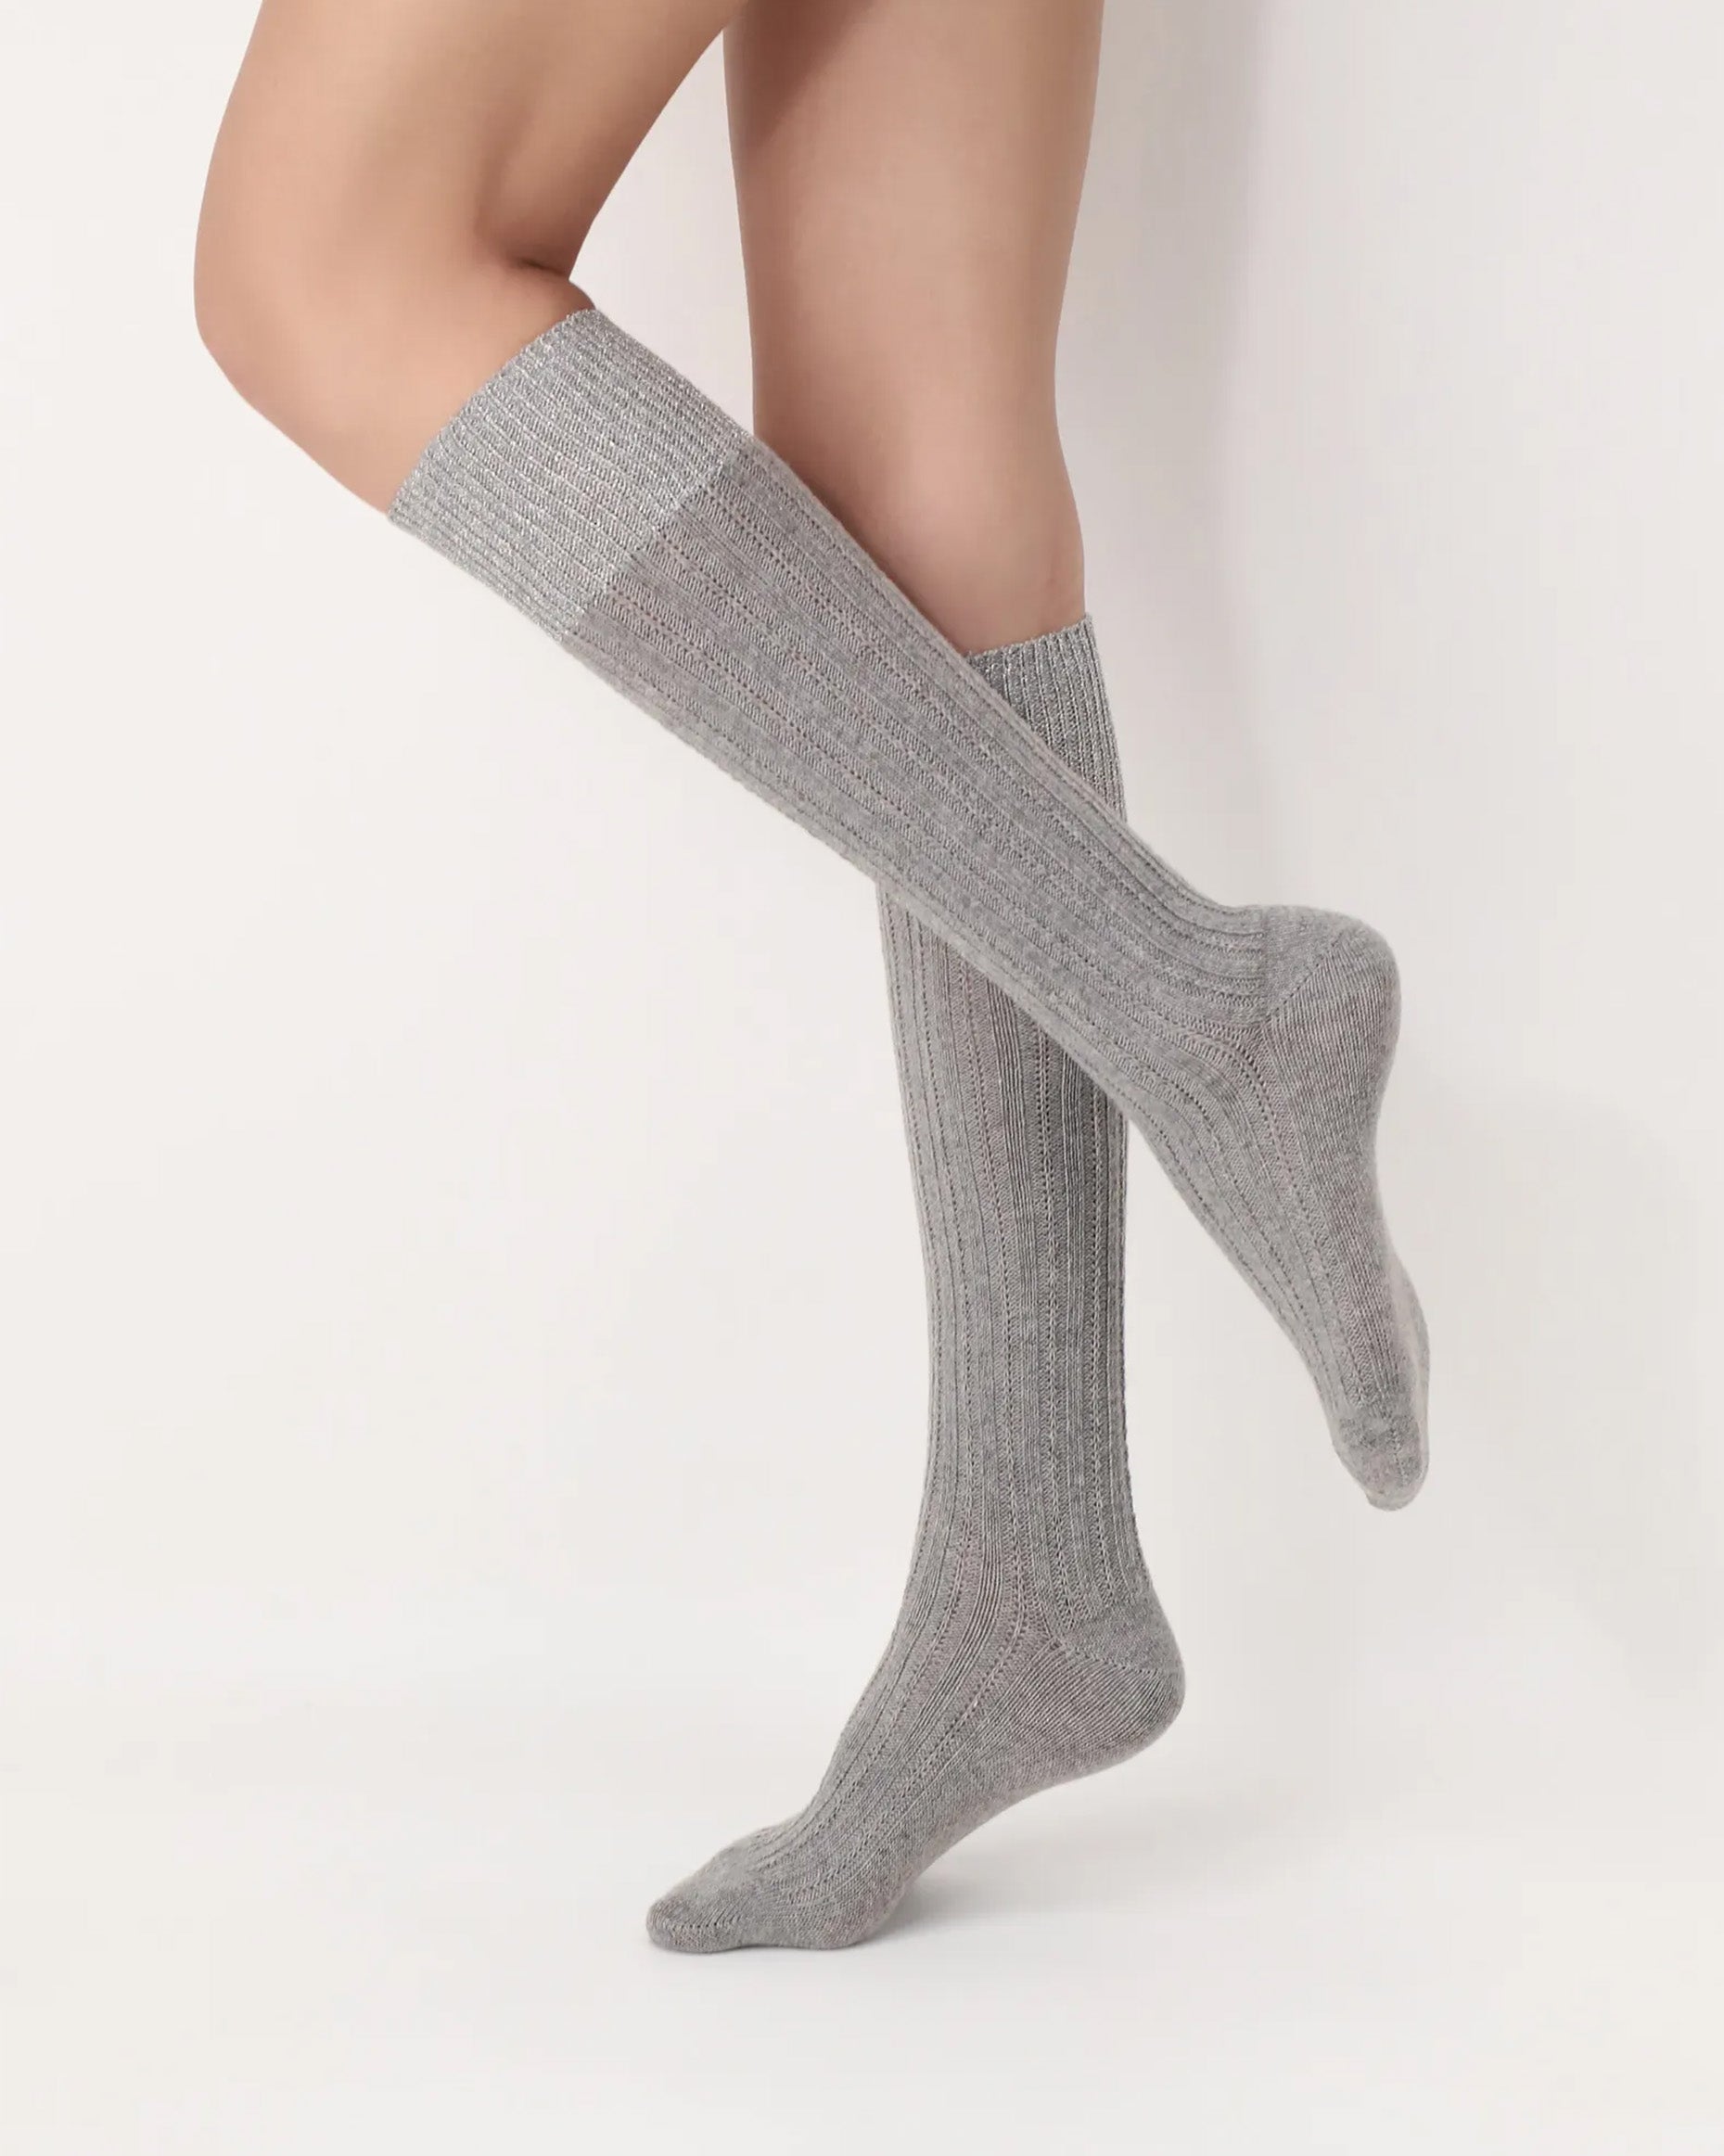 Oroblù Jasmine Gambaletto- Ultra soft and warm light grey ribbed knitted knee-high socks with a touch of alpaca, sparkly silver lamé cuff.